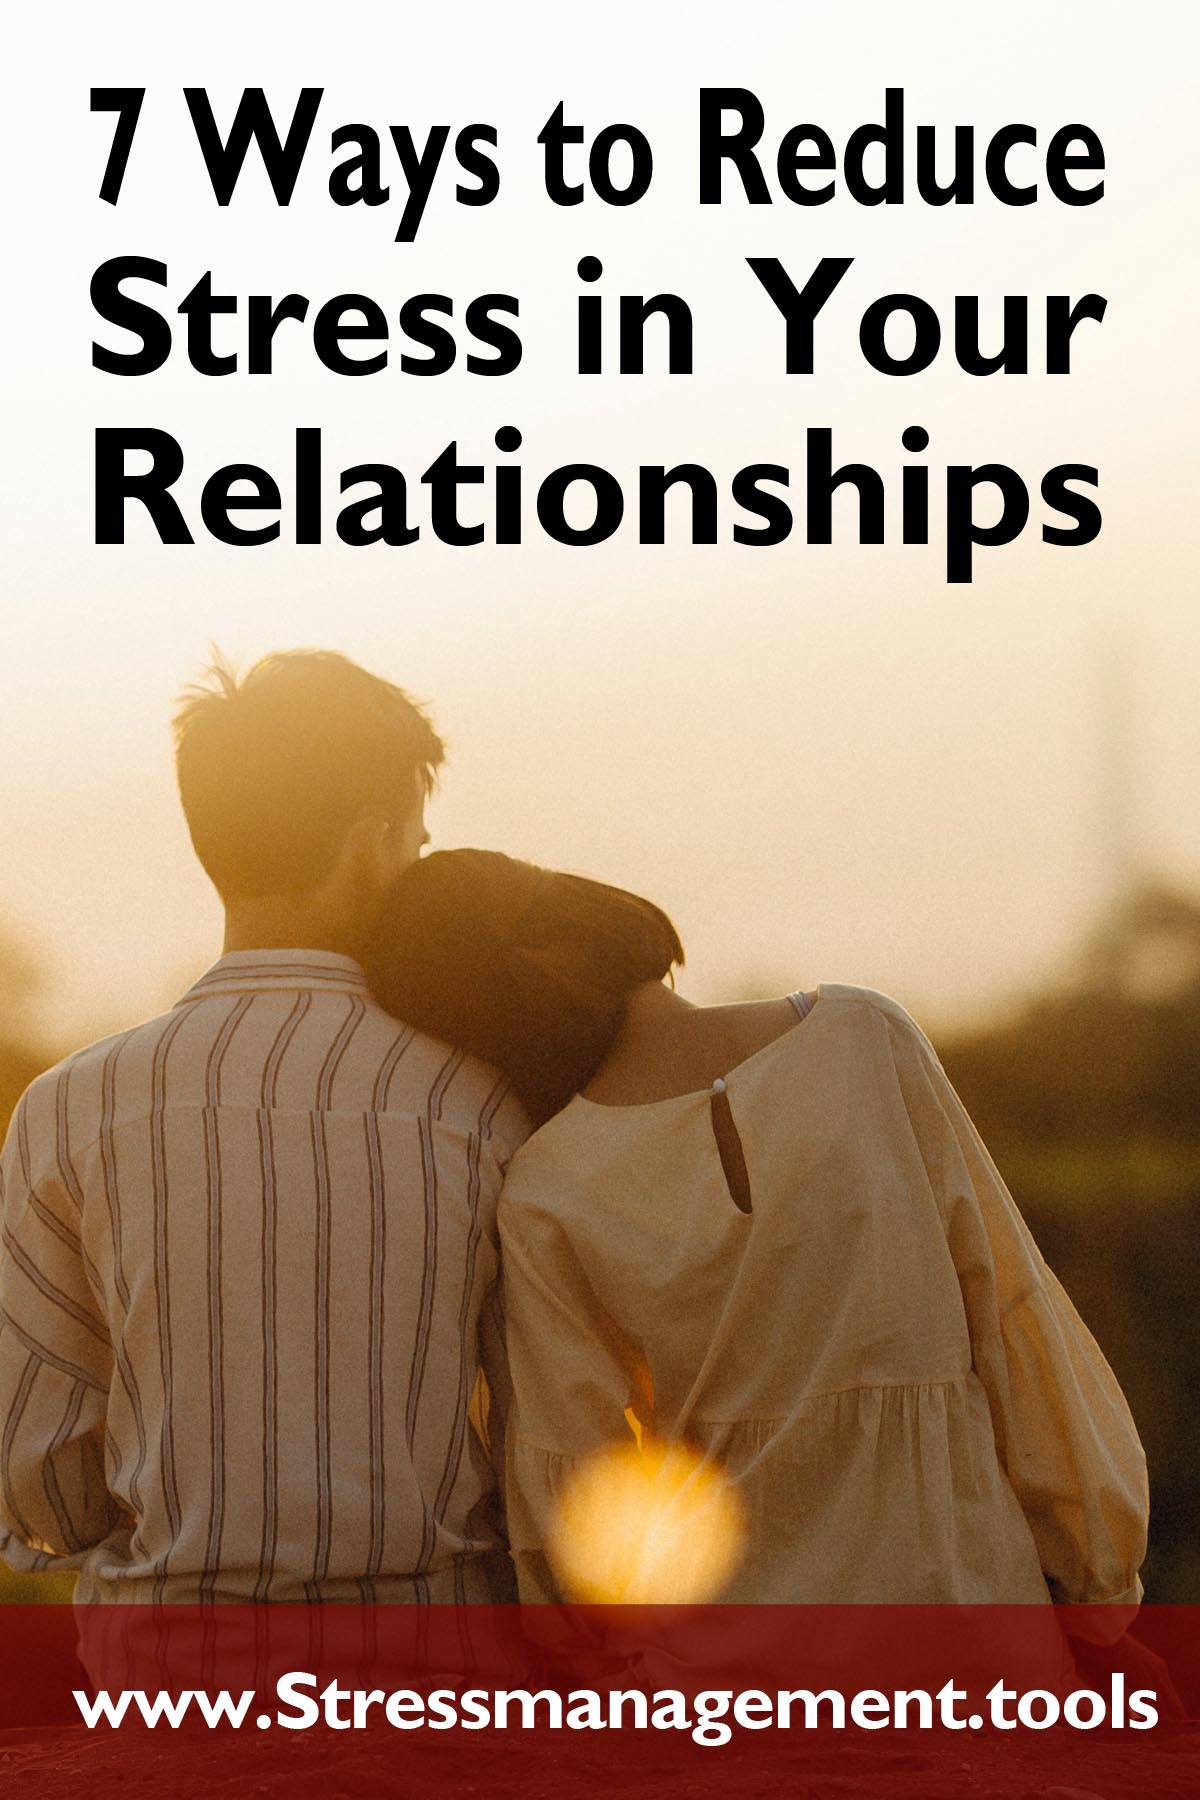 7 Ways to Reduce Stress in Your Relationships